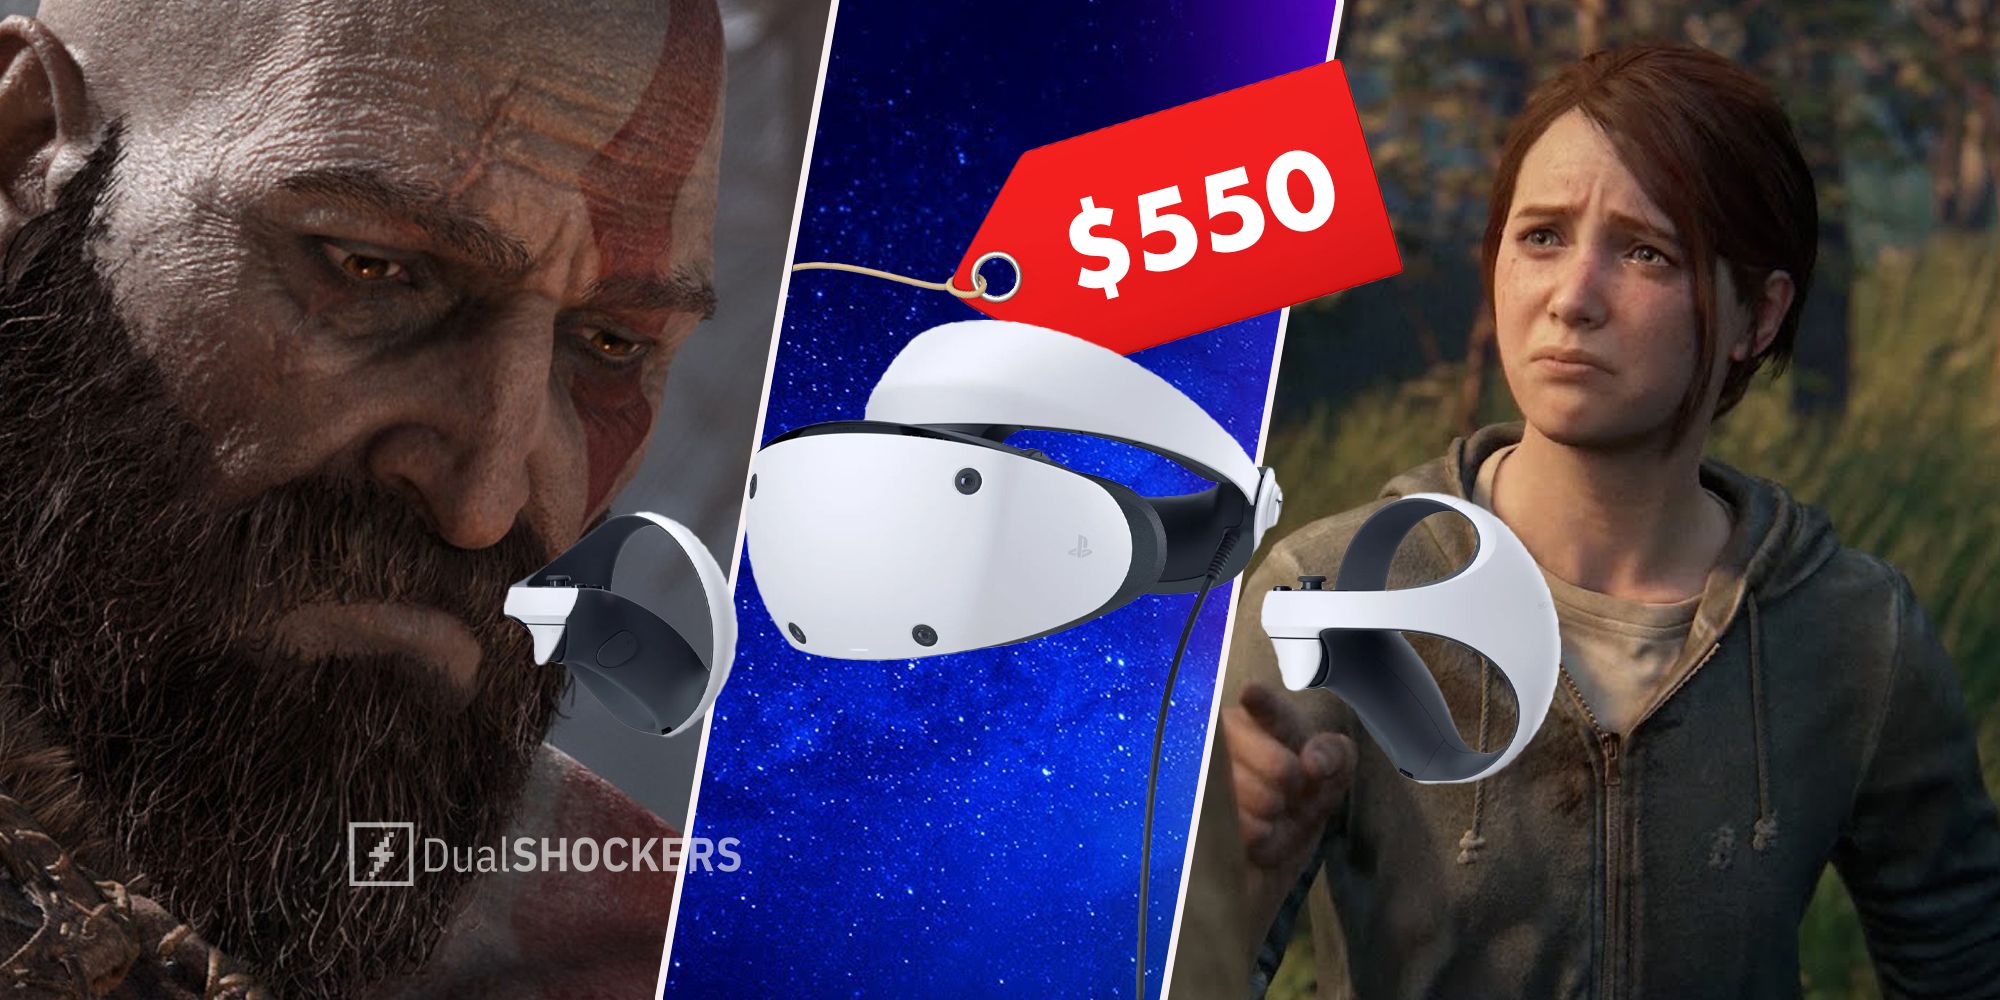 God of War Kratos, PSVR 2 with price tag, and The Last of Us Ellie